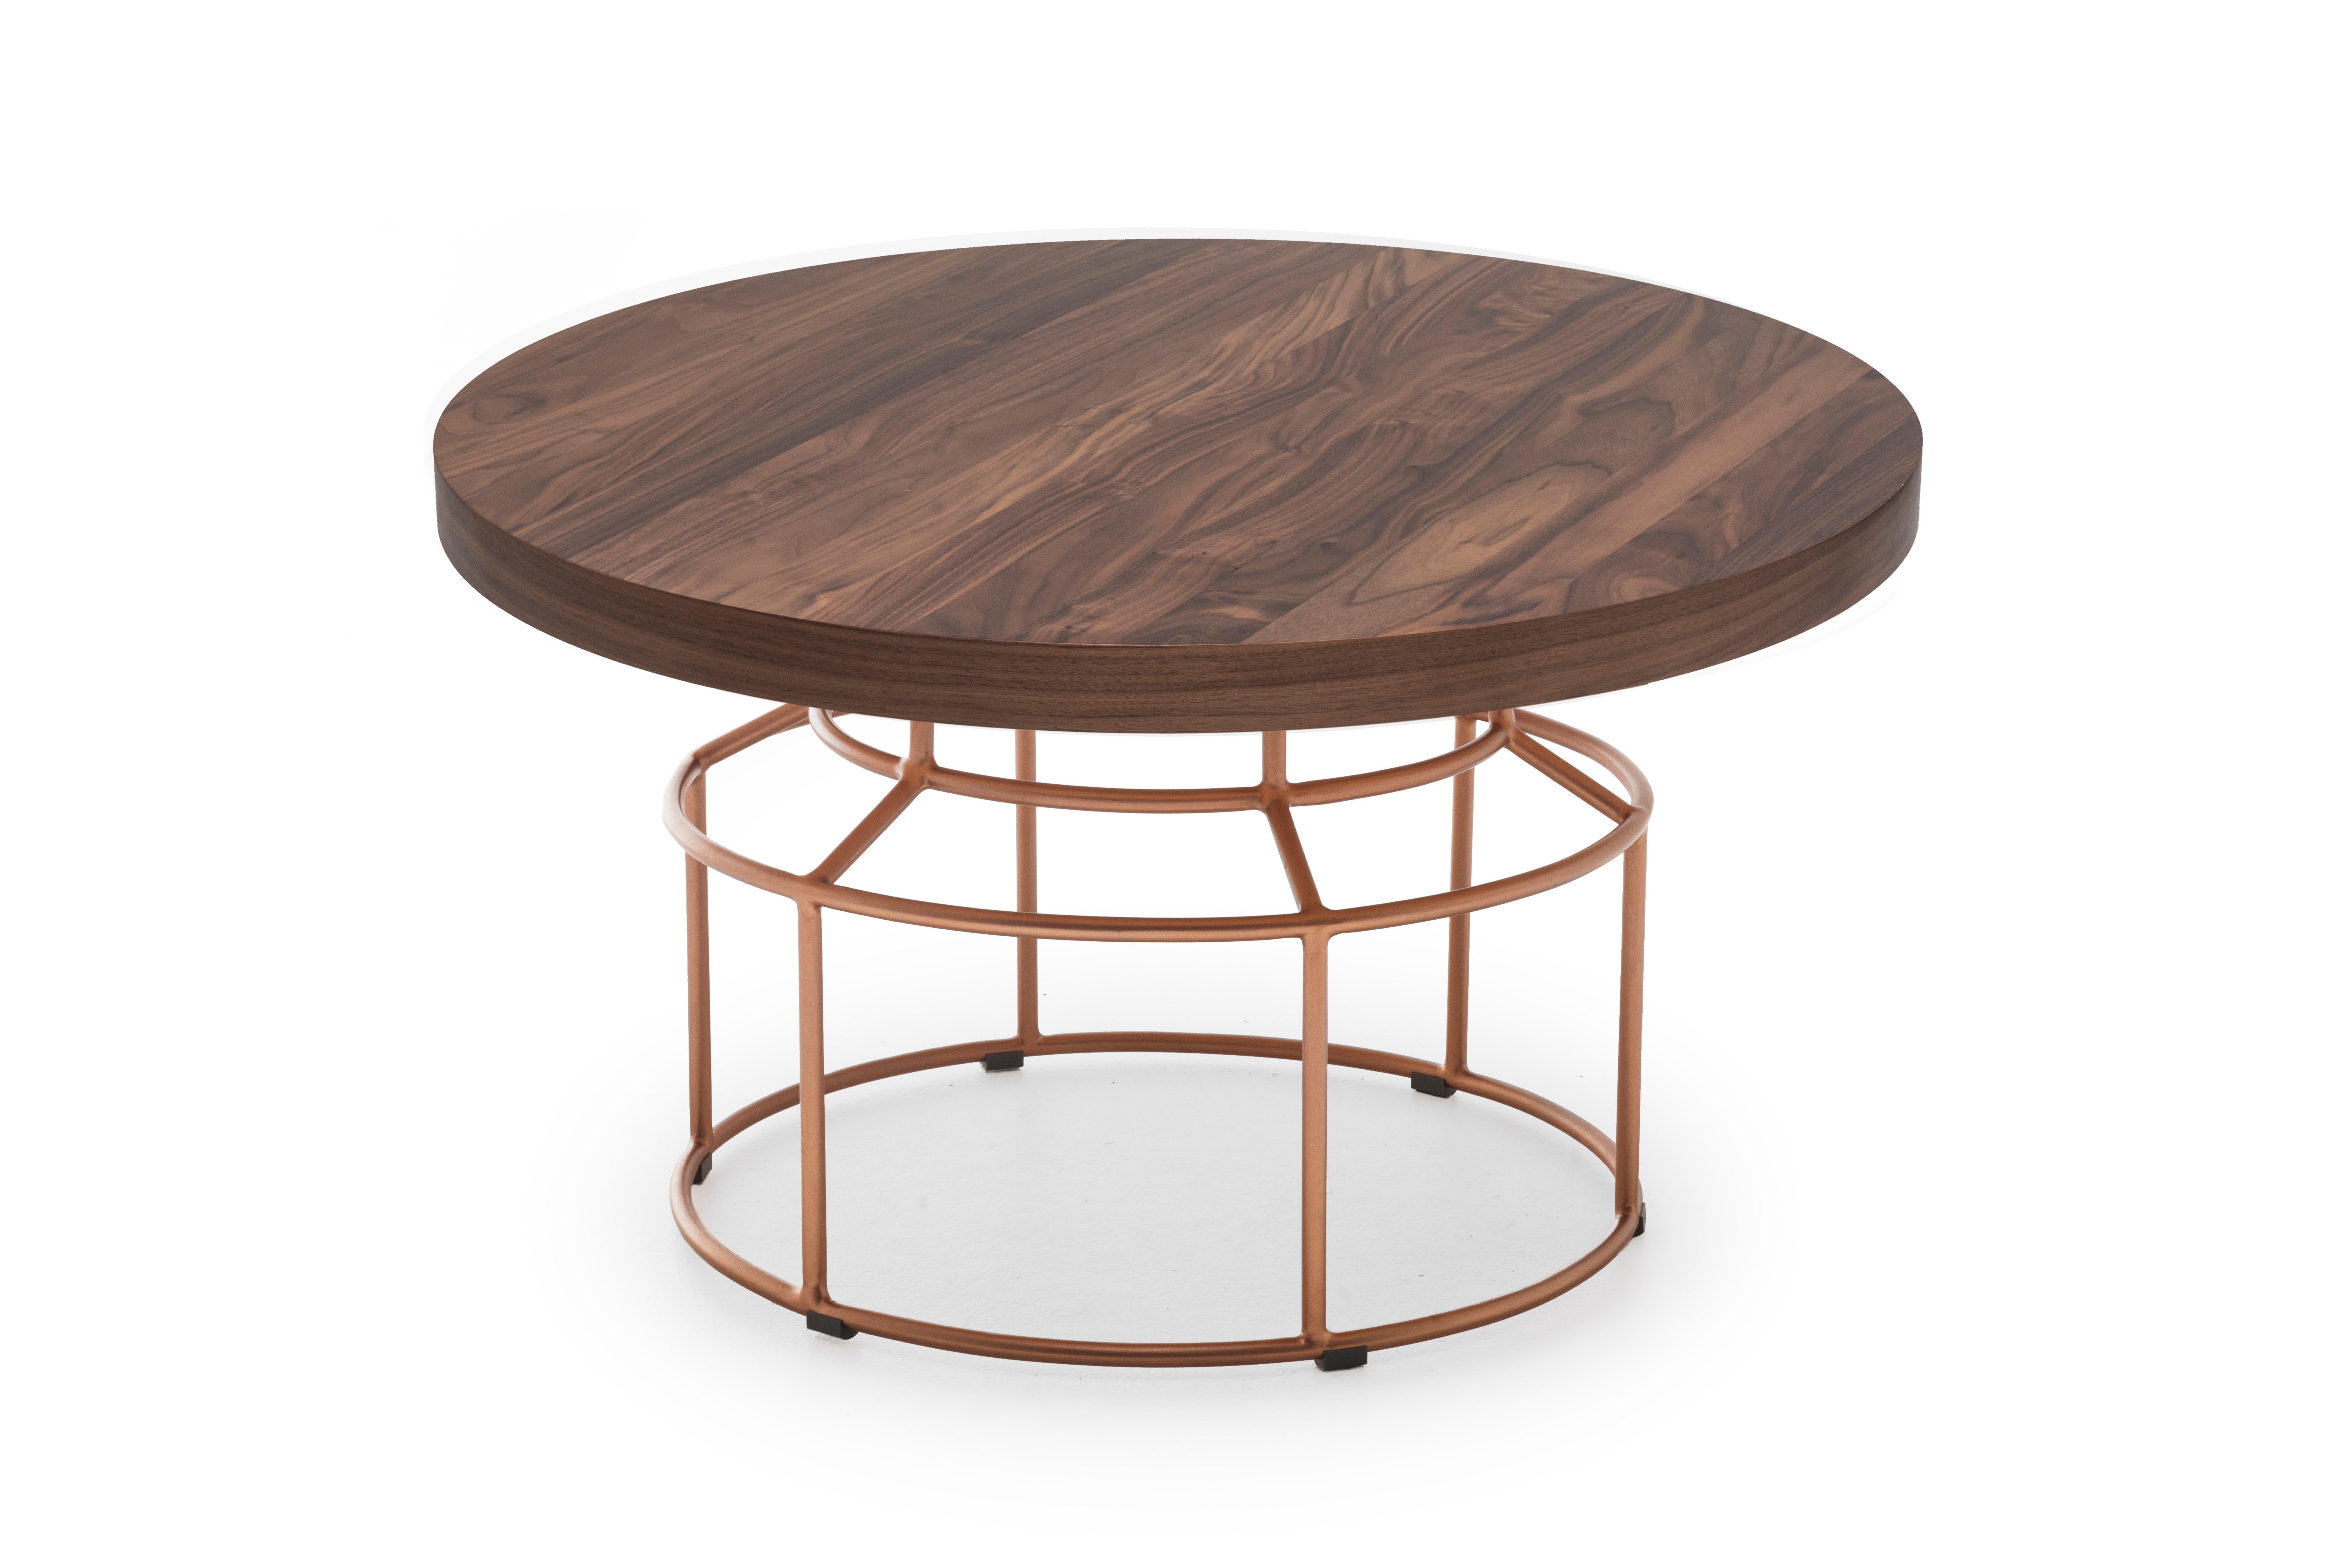 Outdoor high mason coffee table by Kenneth Cobonpue.
Materials: Fiberglass, Aluminum.
Also available in other colors. 
Dimensions: Diameter 70cm x height 45cm 

Jars are typically placed on shelves and cupboards. Mason is a reimagining of that,